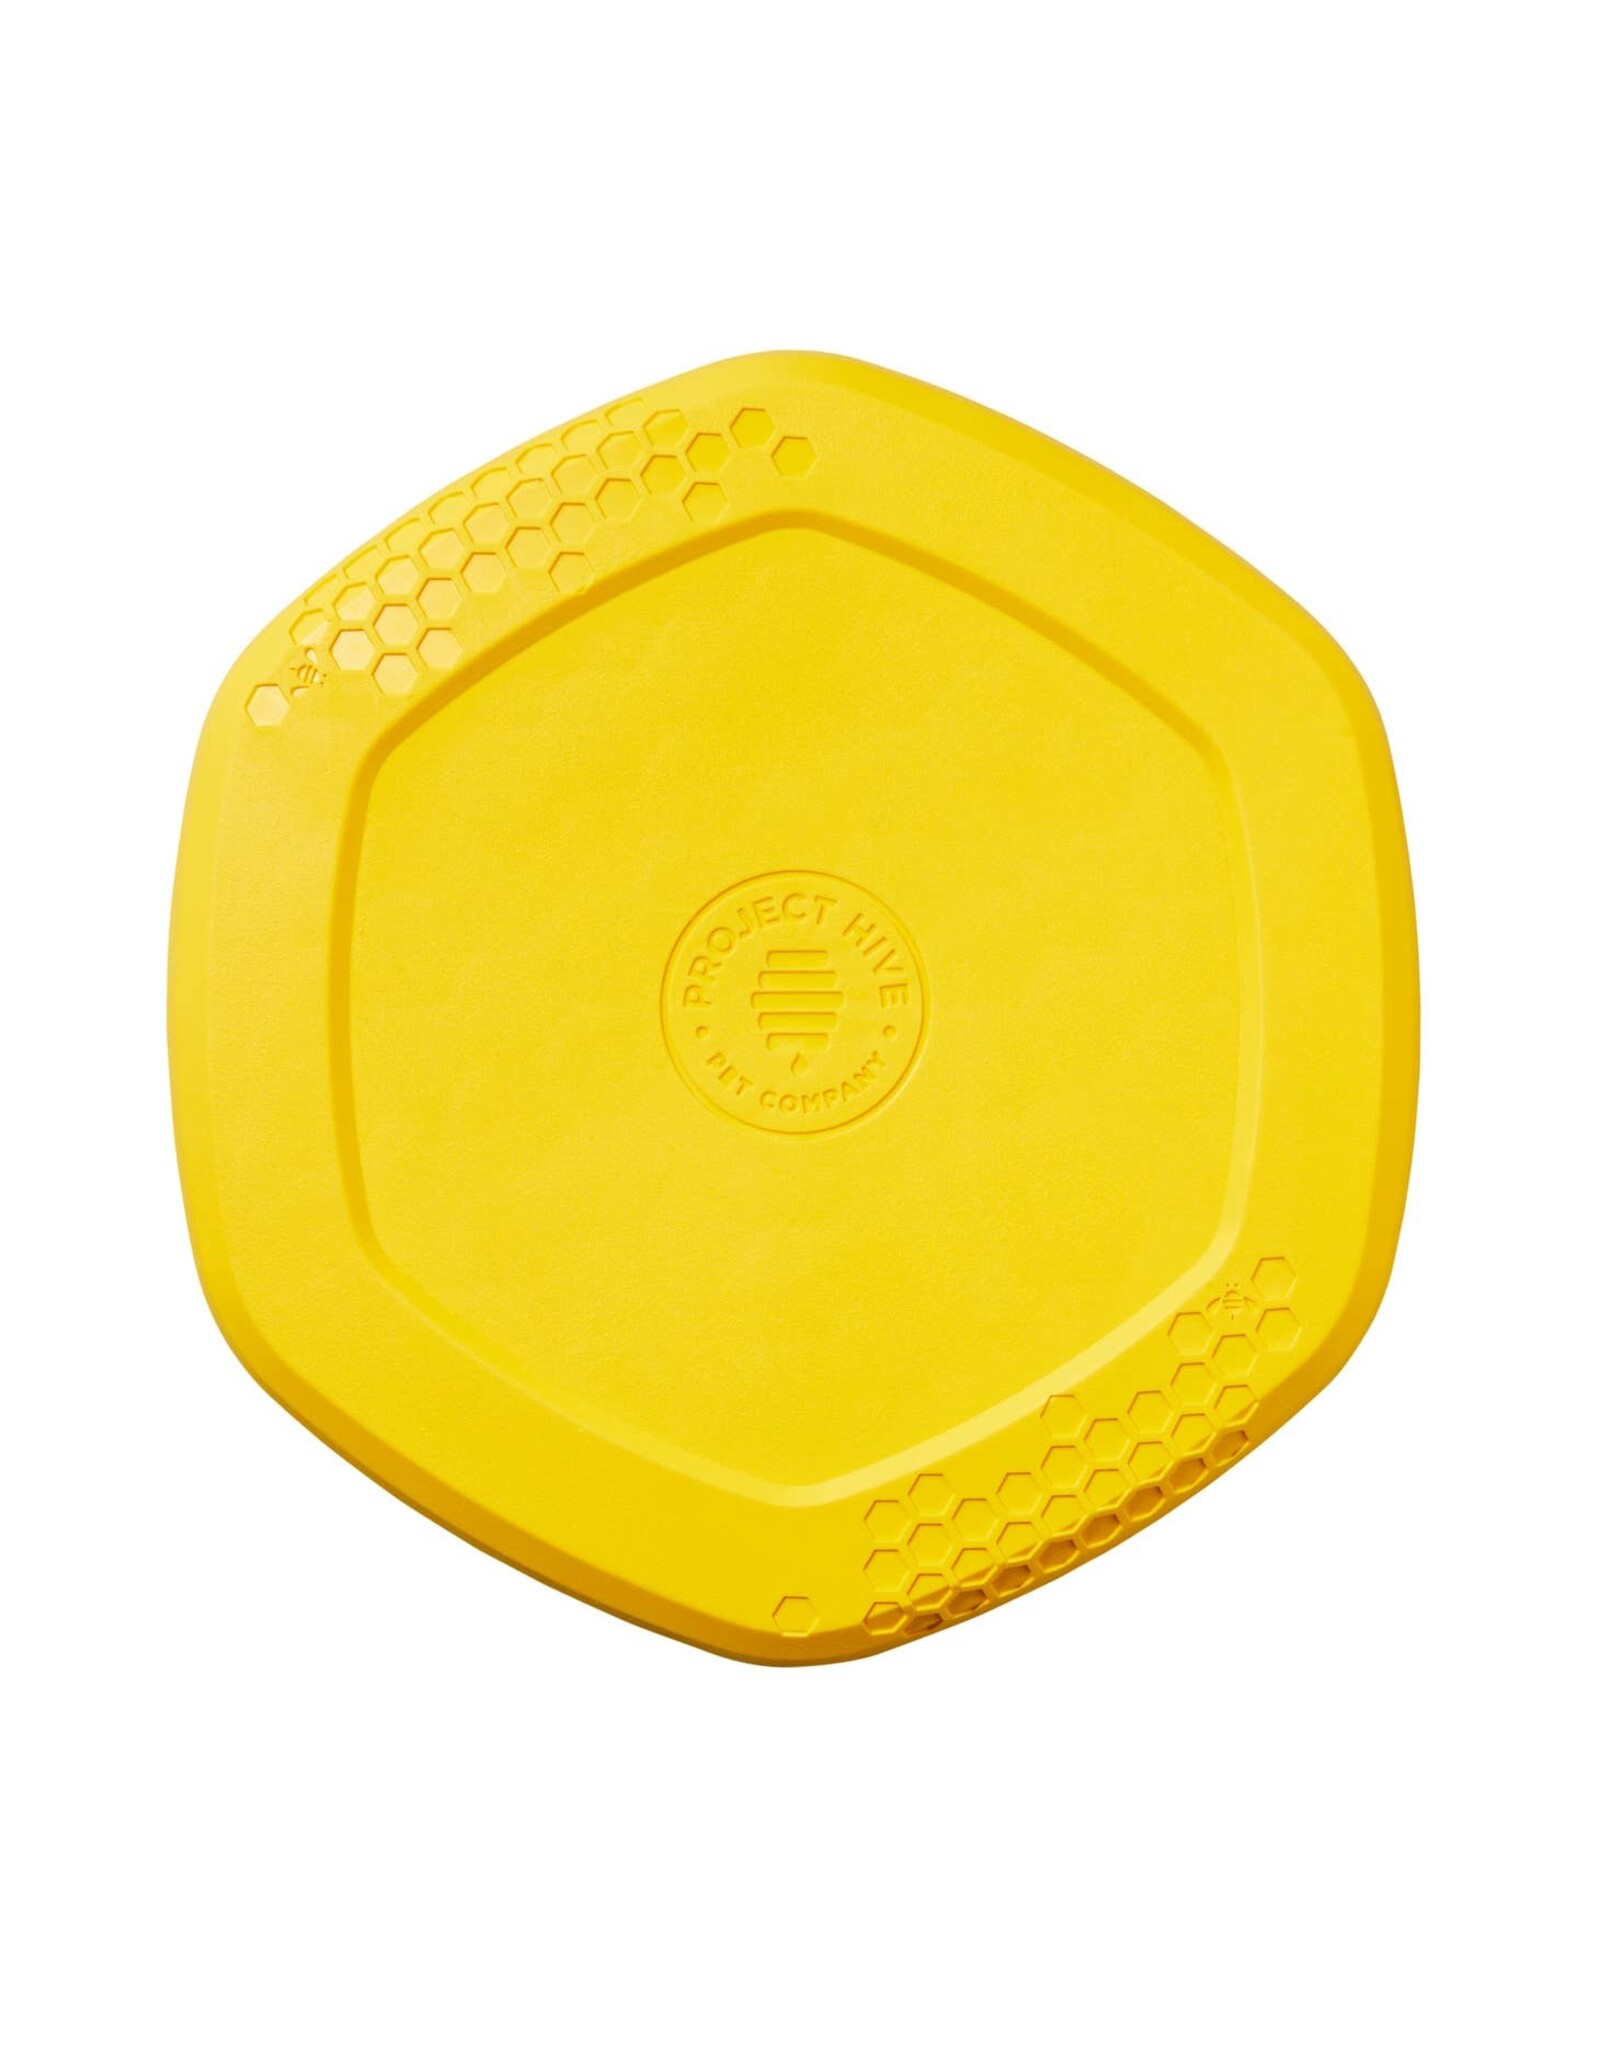 Project Hive Project Hive Disc